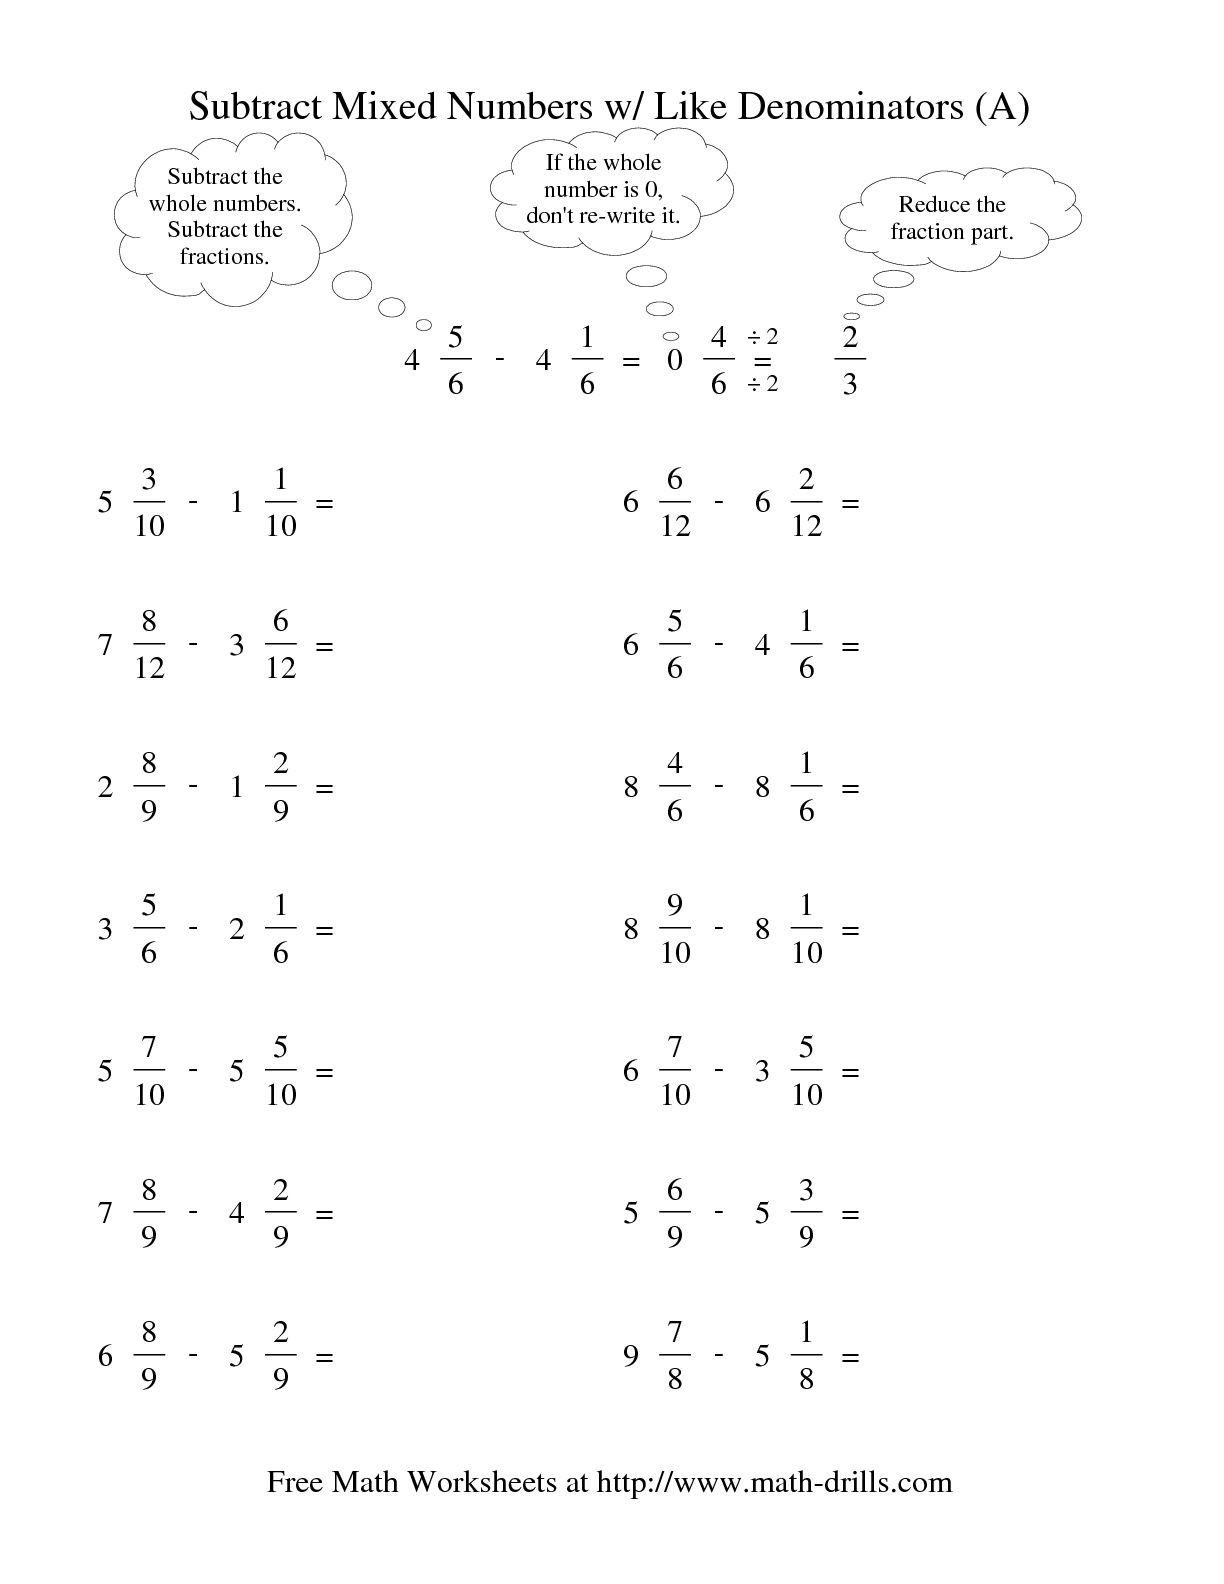 Subtracting Mixed Numbers From Whole Numbers Worksheet